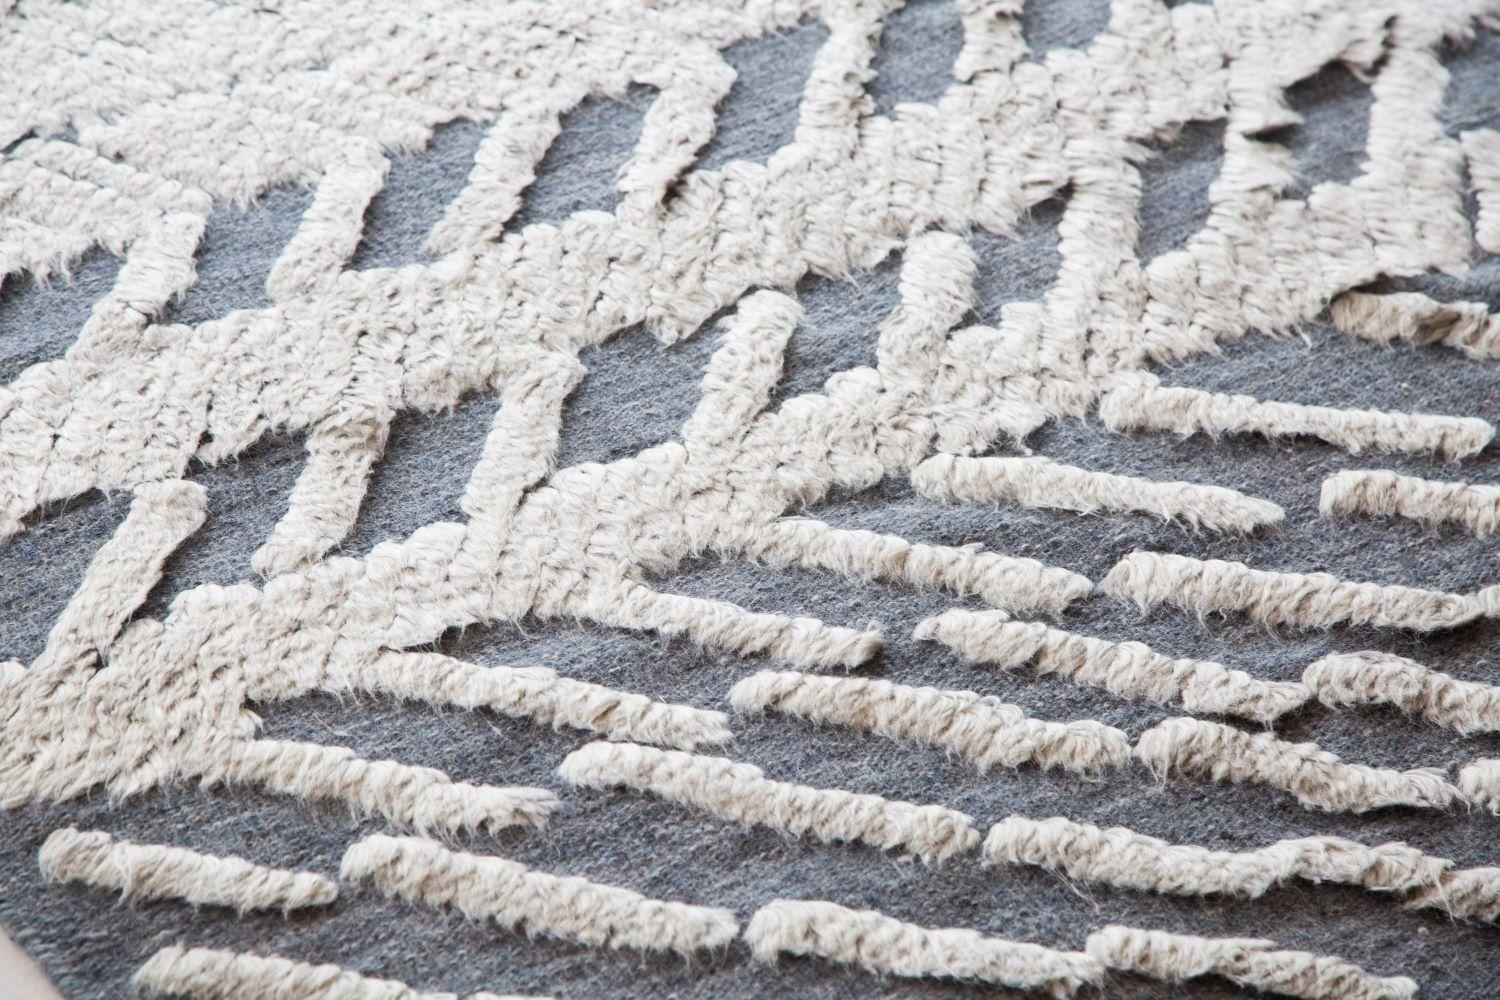 Beautiful Room Size Modernist Collection Rug, Rug Type / Country of Origin: India – Gray and white are modern design essentials. They are finding their way into a range of styles from ultramodern to Boho chic. This gorgeous medium gray and white